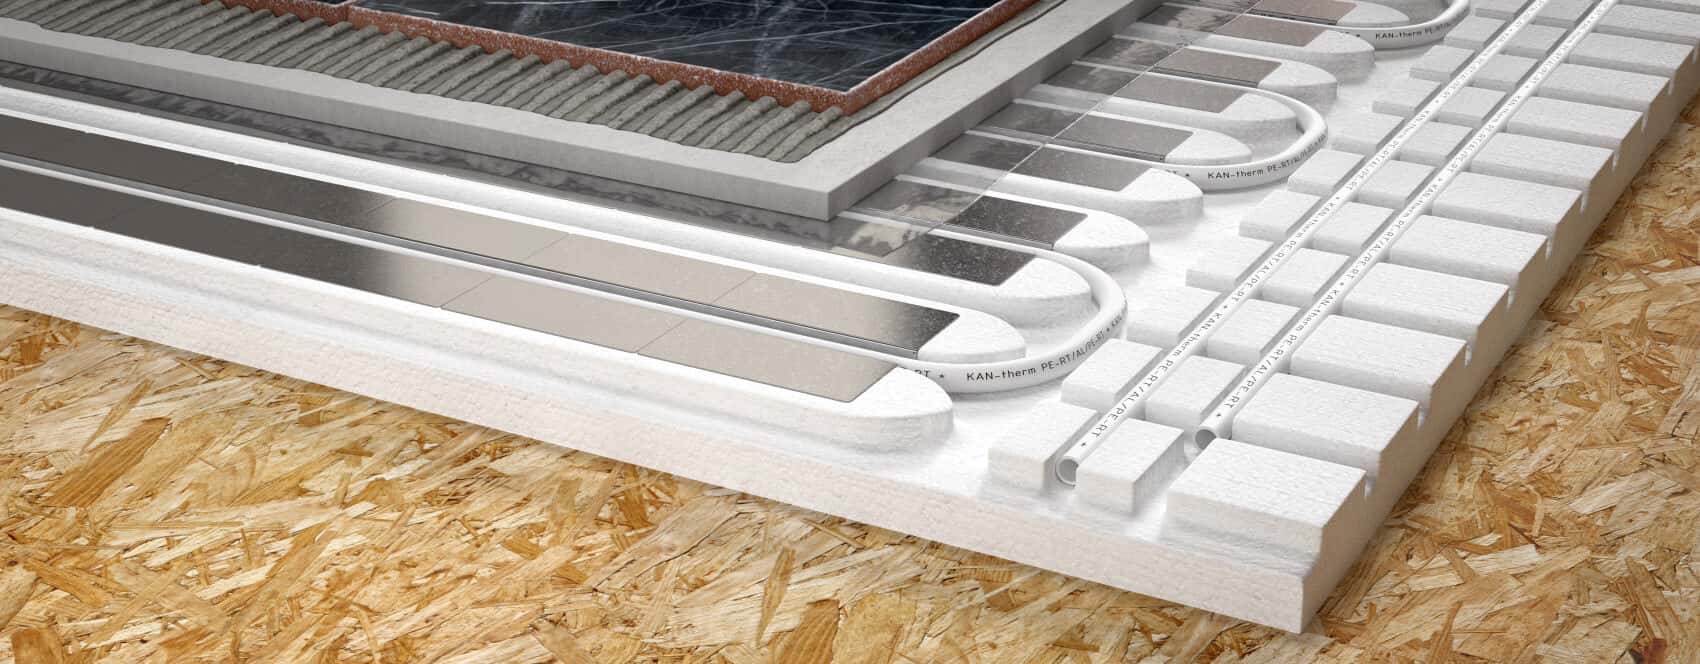 KAN-therm - TBS System - Designed for wood construction.